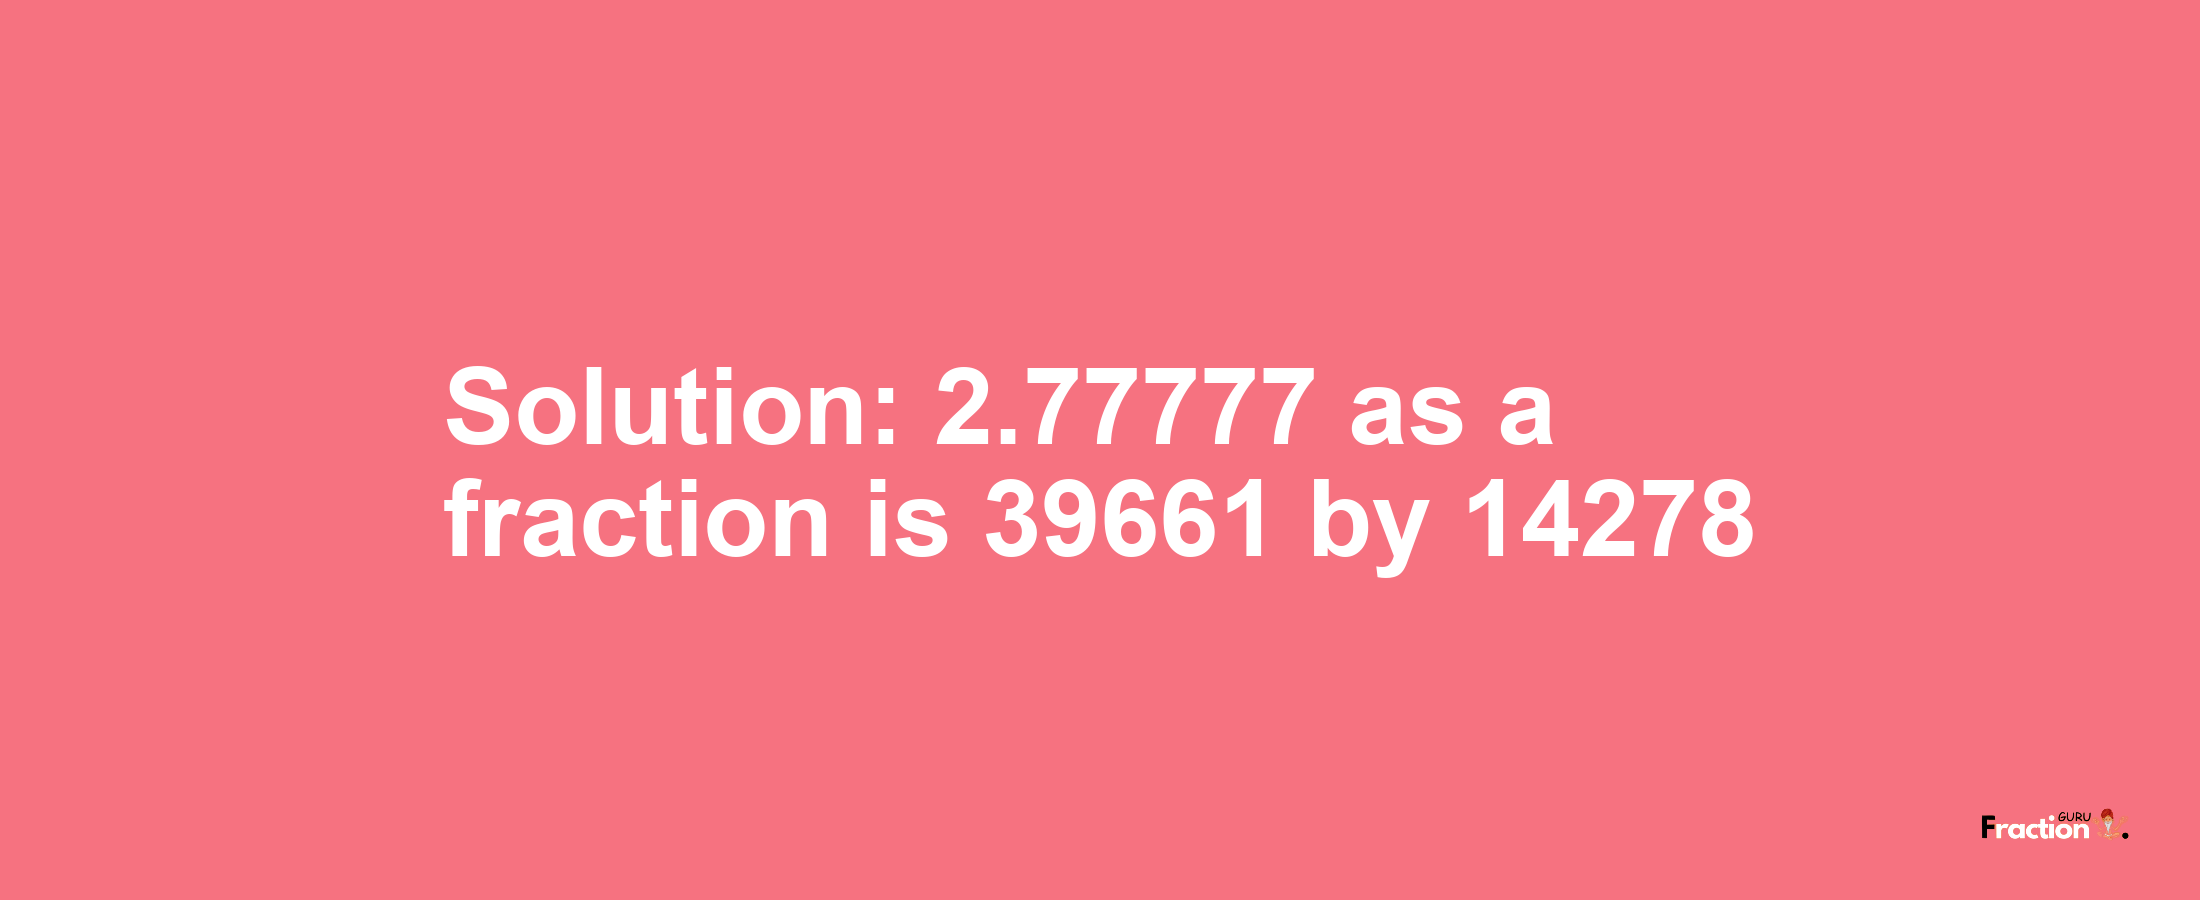 Solution:2.77777 as a fraction is 39661/14278